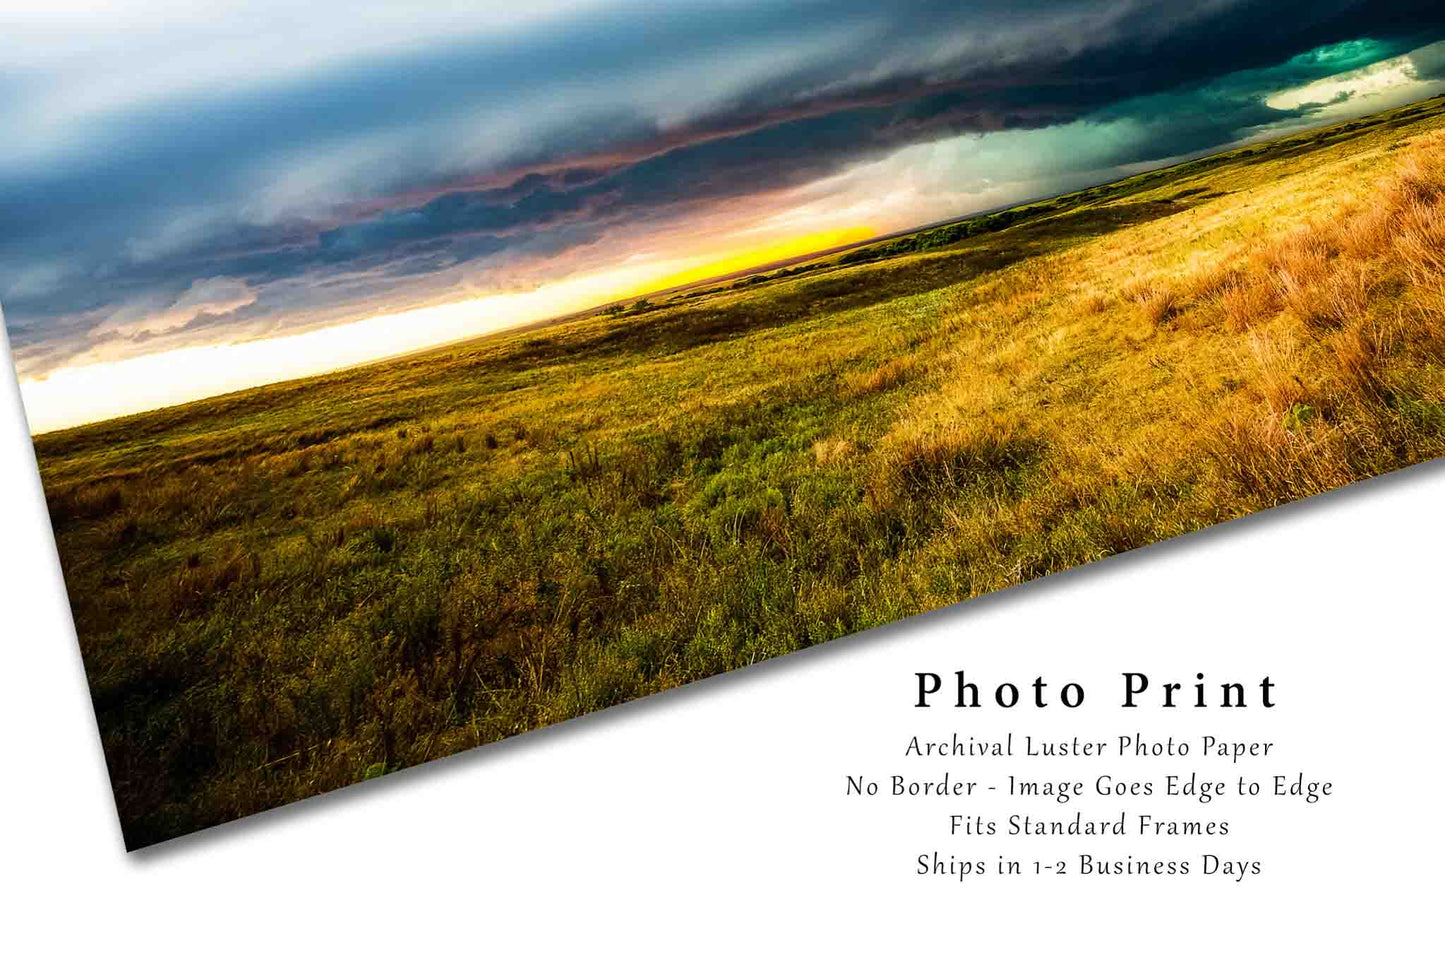 Storm Picture - Fine Art Landscape Photography Print of Thunderstorm Over Open Prairie in Kansas Weather Wall Art Photo Decor 5x7 to 40x60